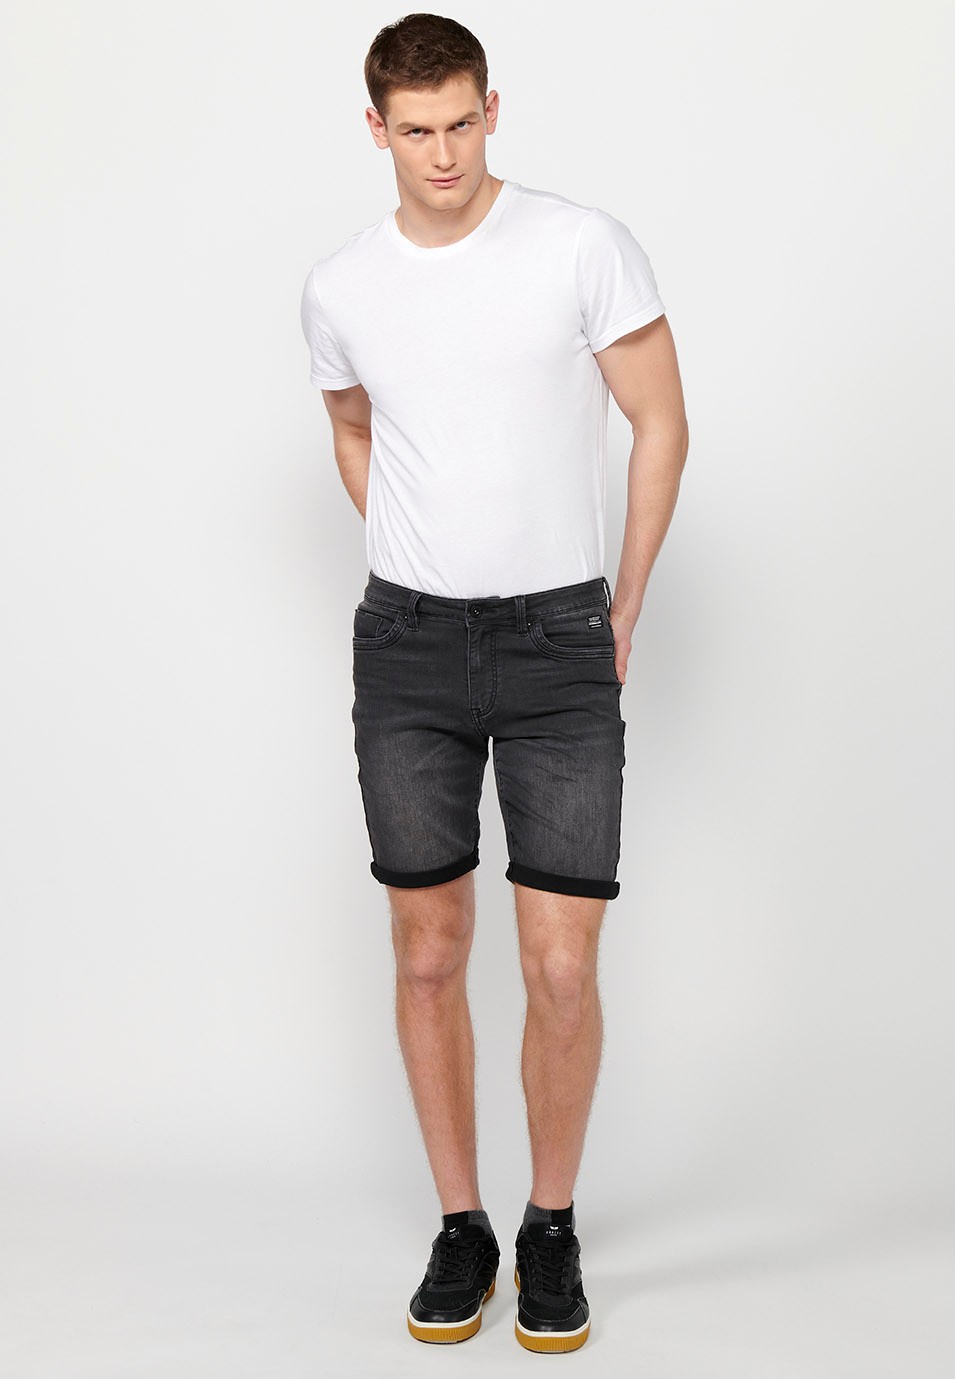 Shorts with turn-up finish with front closure with zipper and button in Black for Men